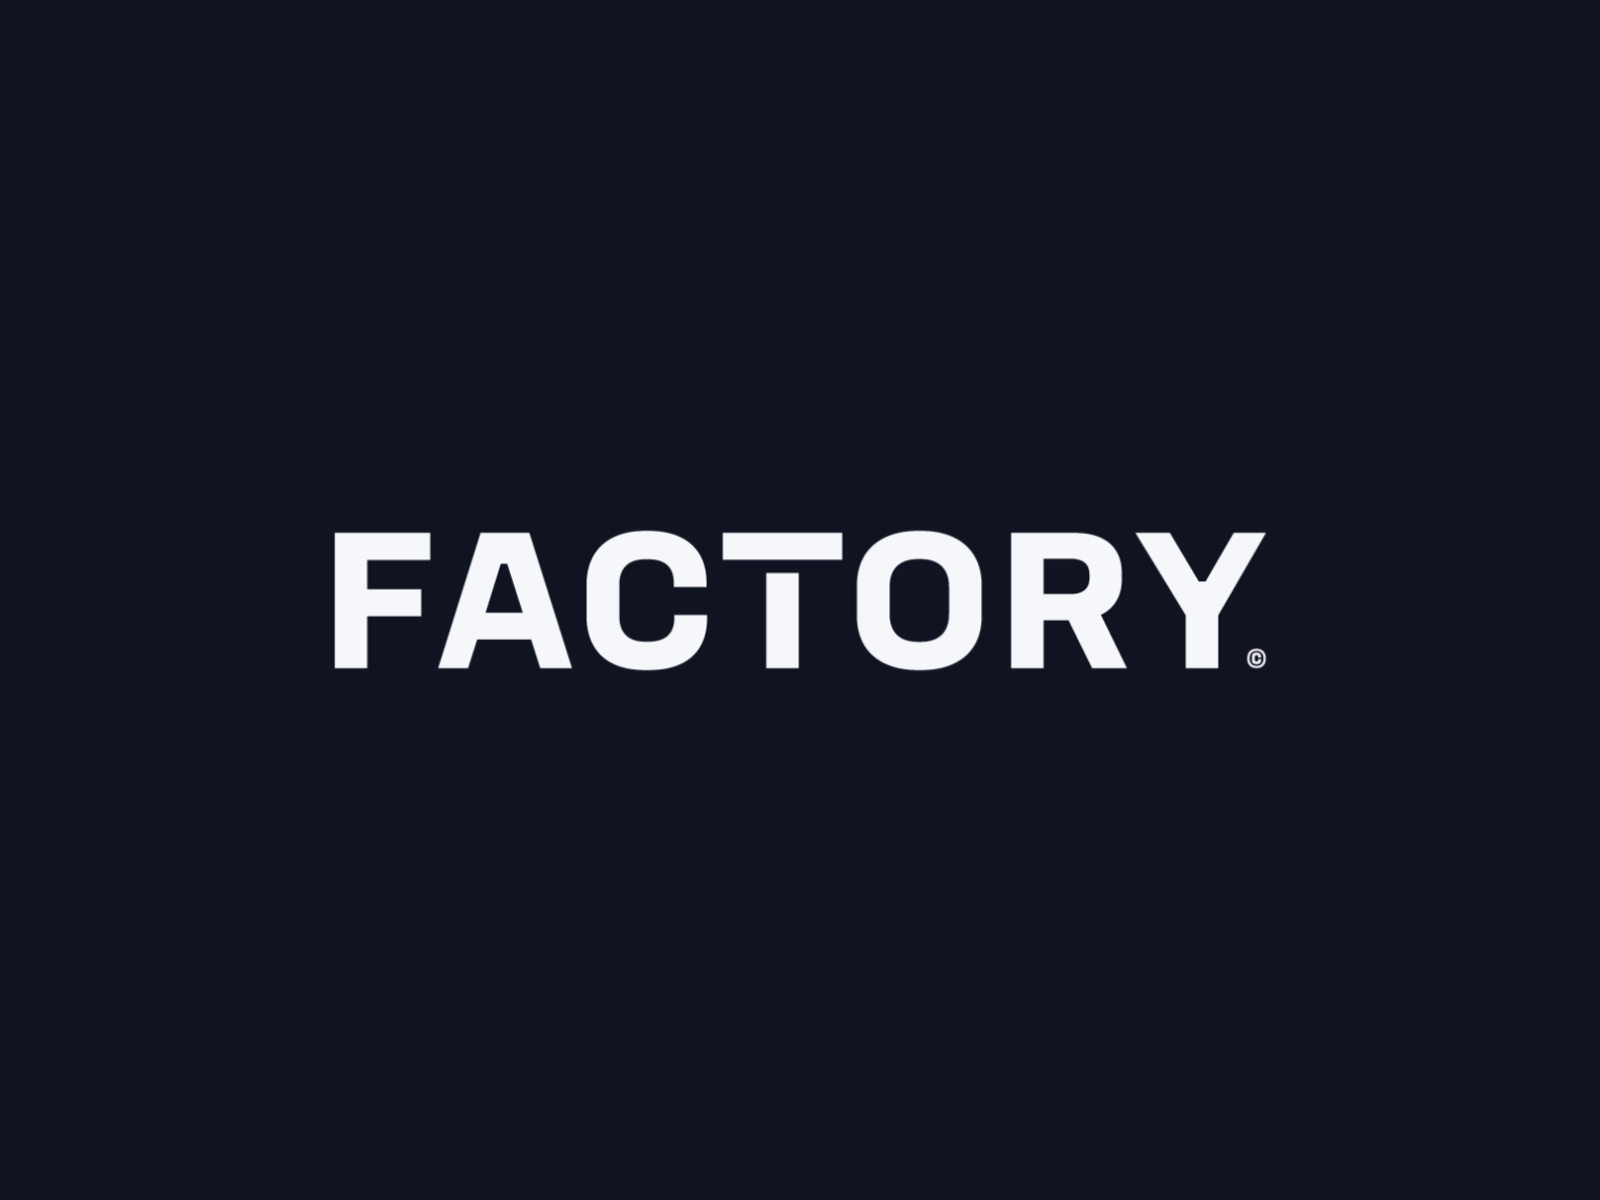 Factory Logotype by Patrick Tuell on Dribbble